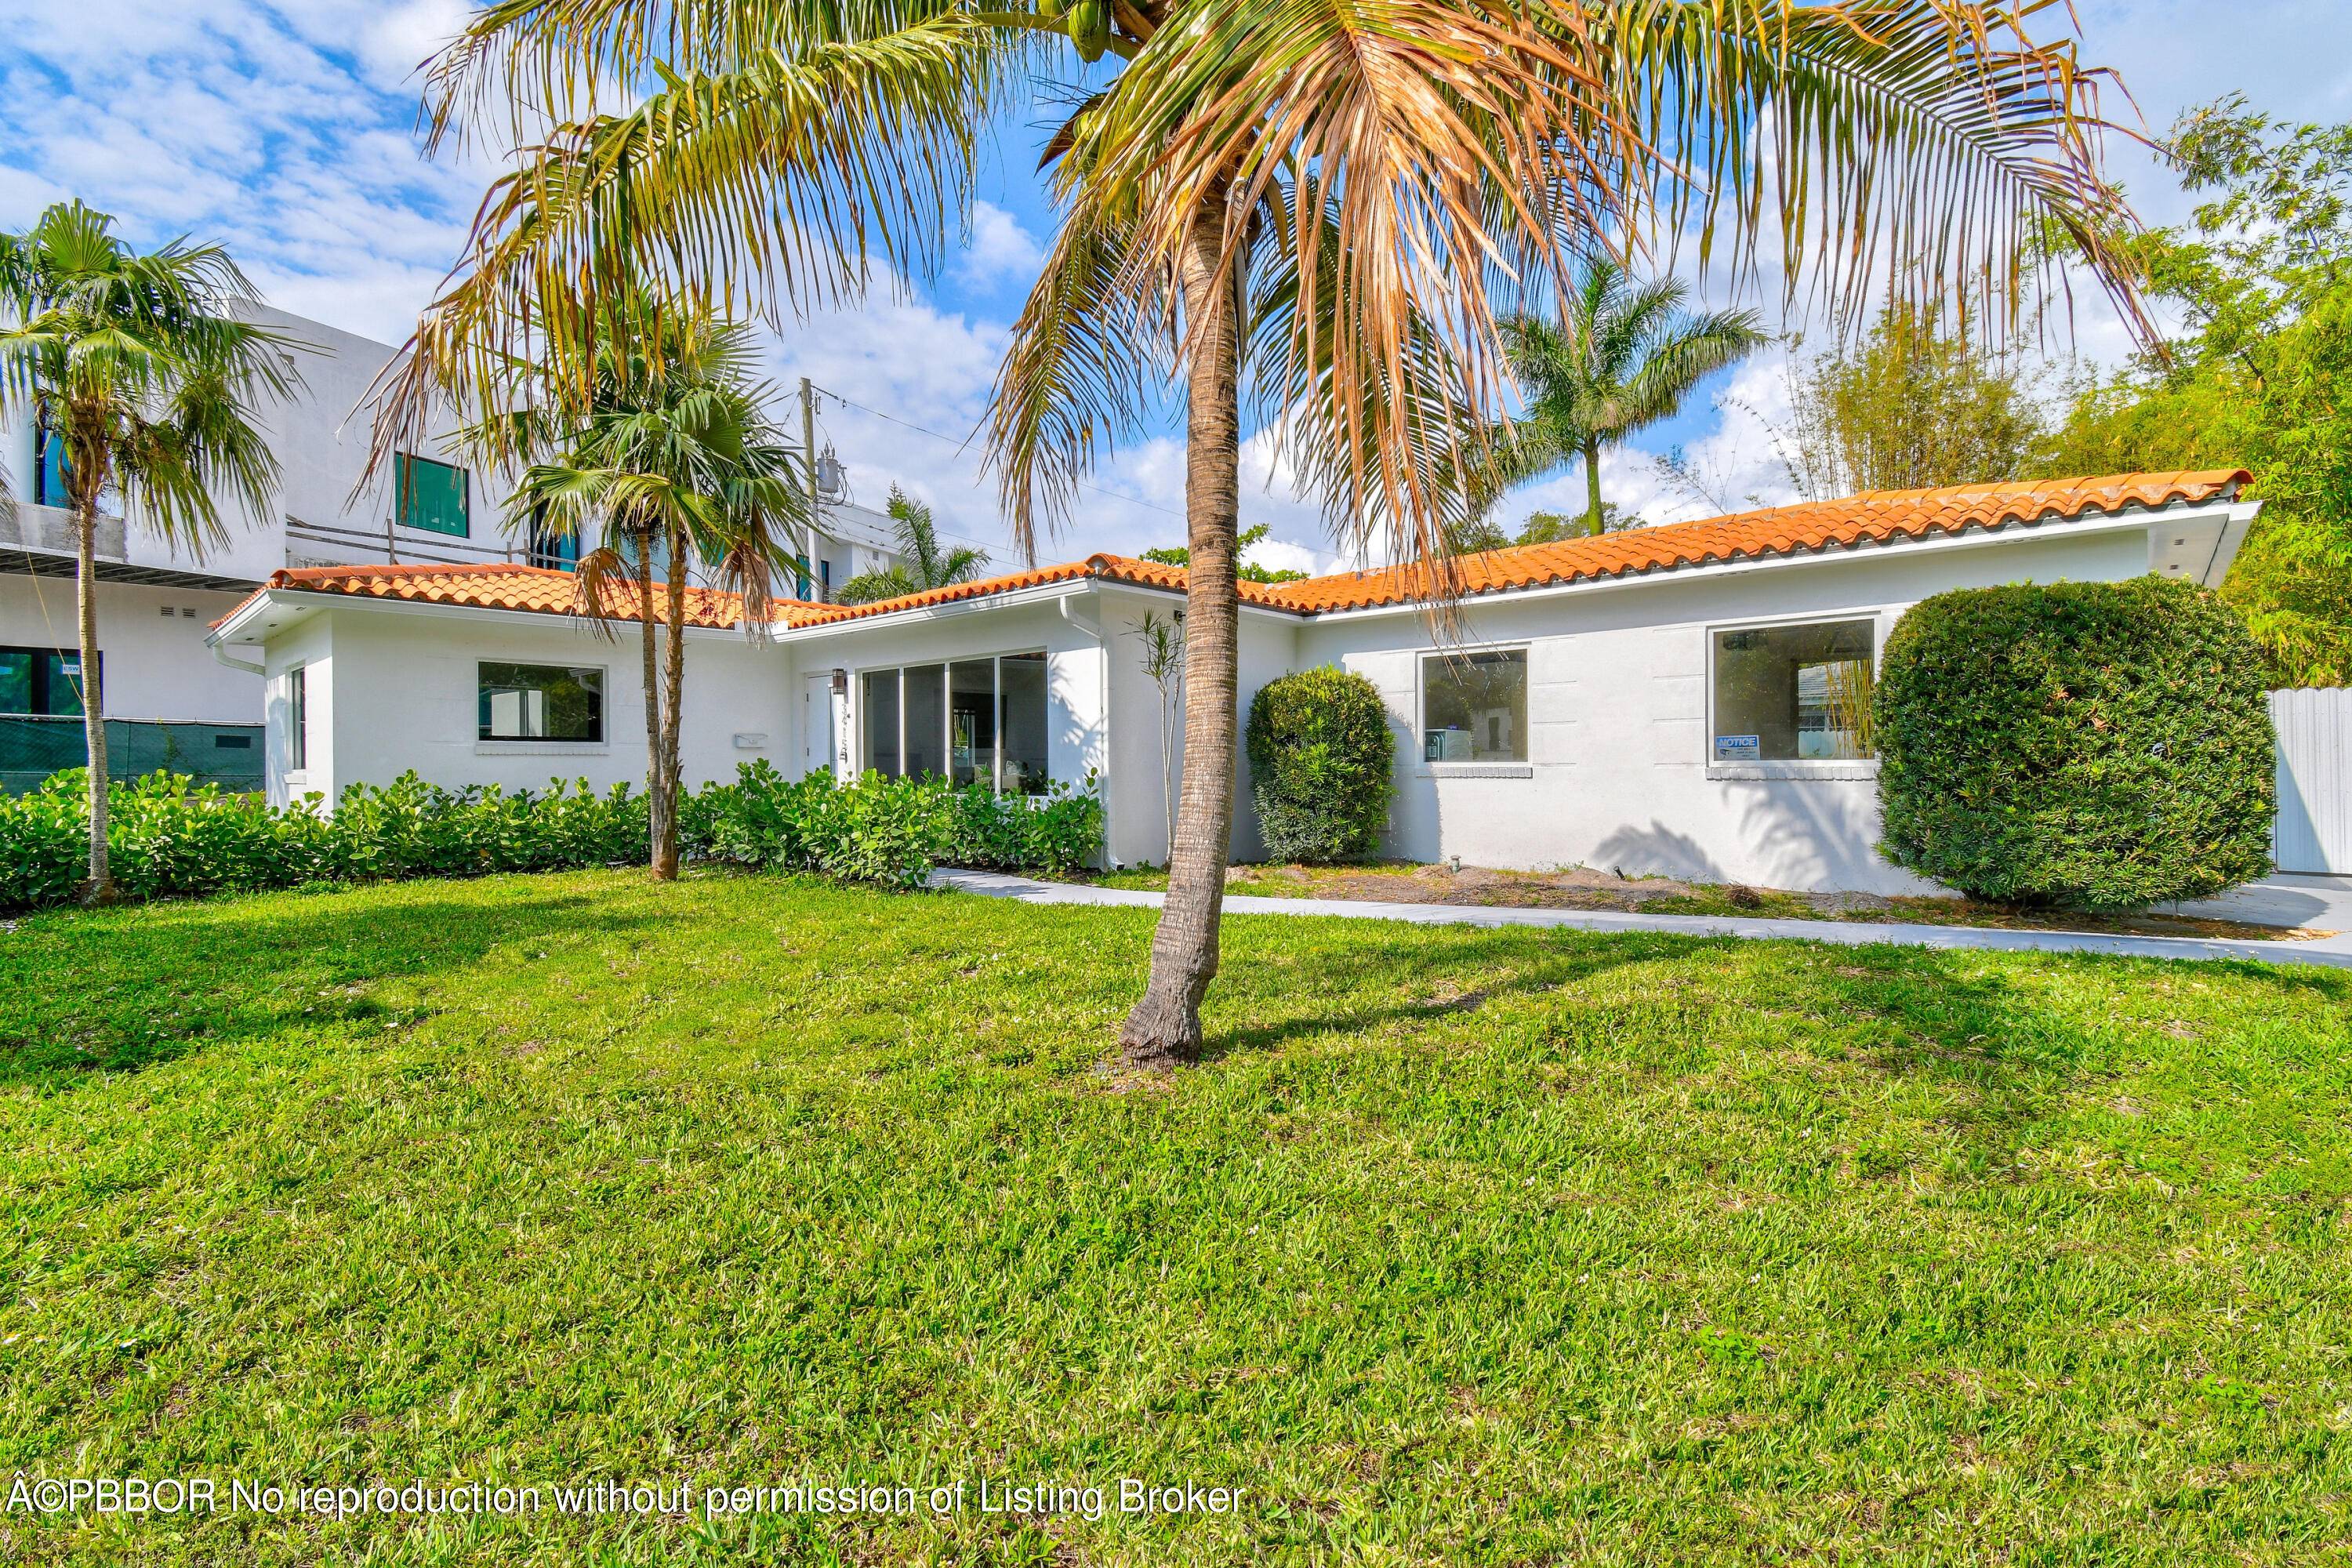 Beautiful 3 bedroom, 2 and a half bath home in the desirable Northwood neighborhood of West Palm Beach, located on the iconic Flagler Drive.